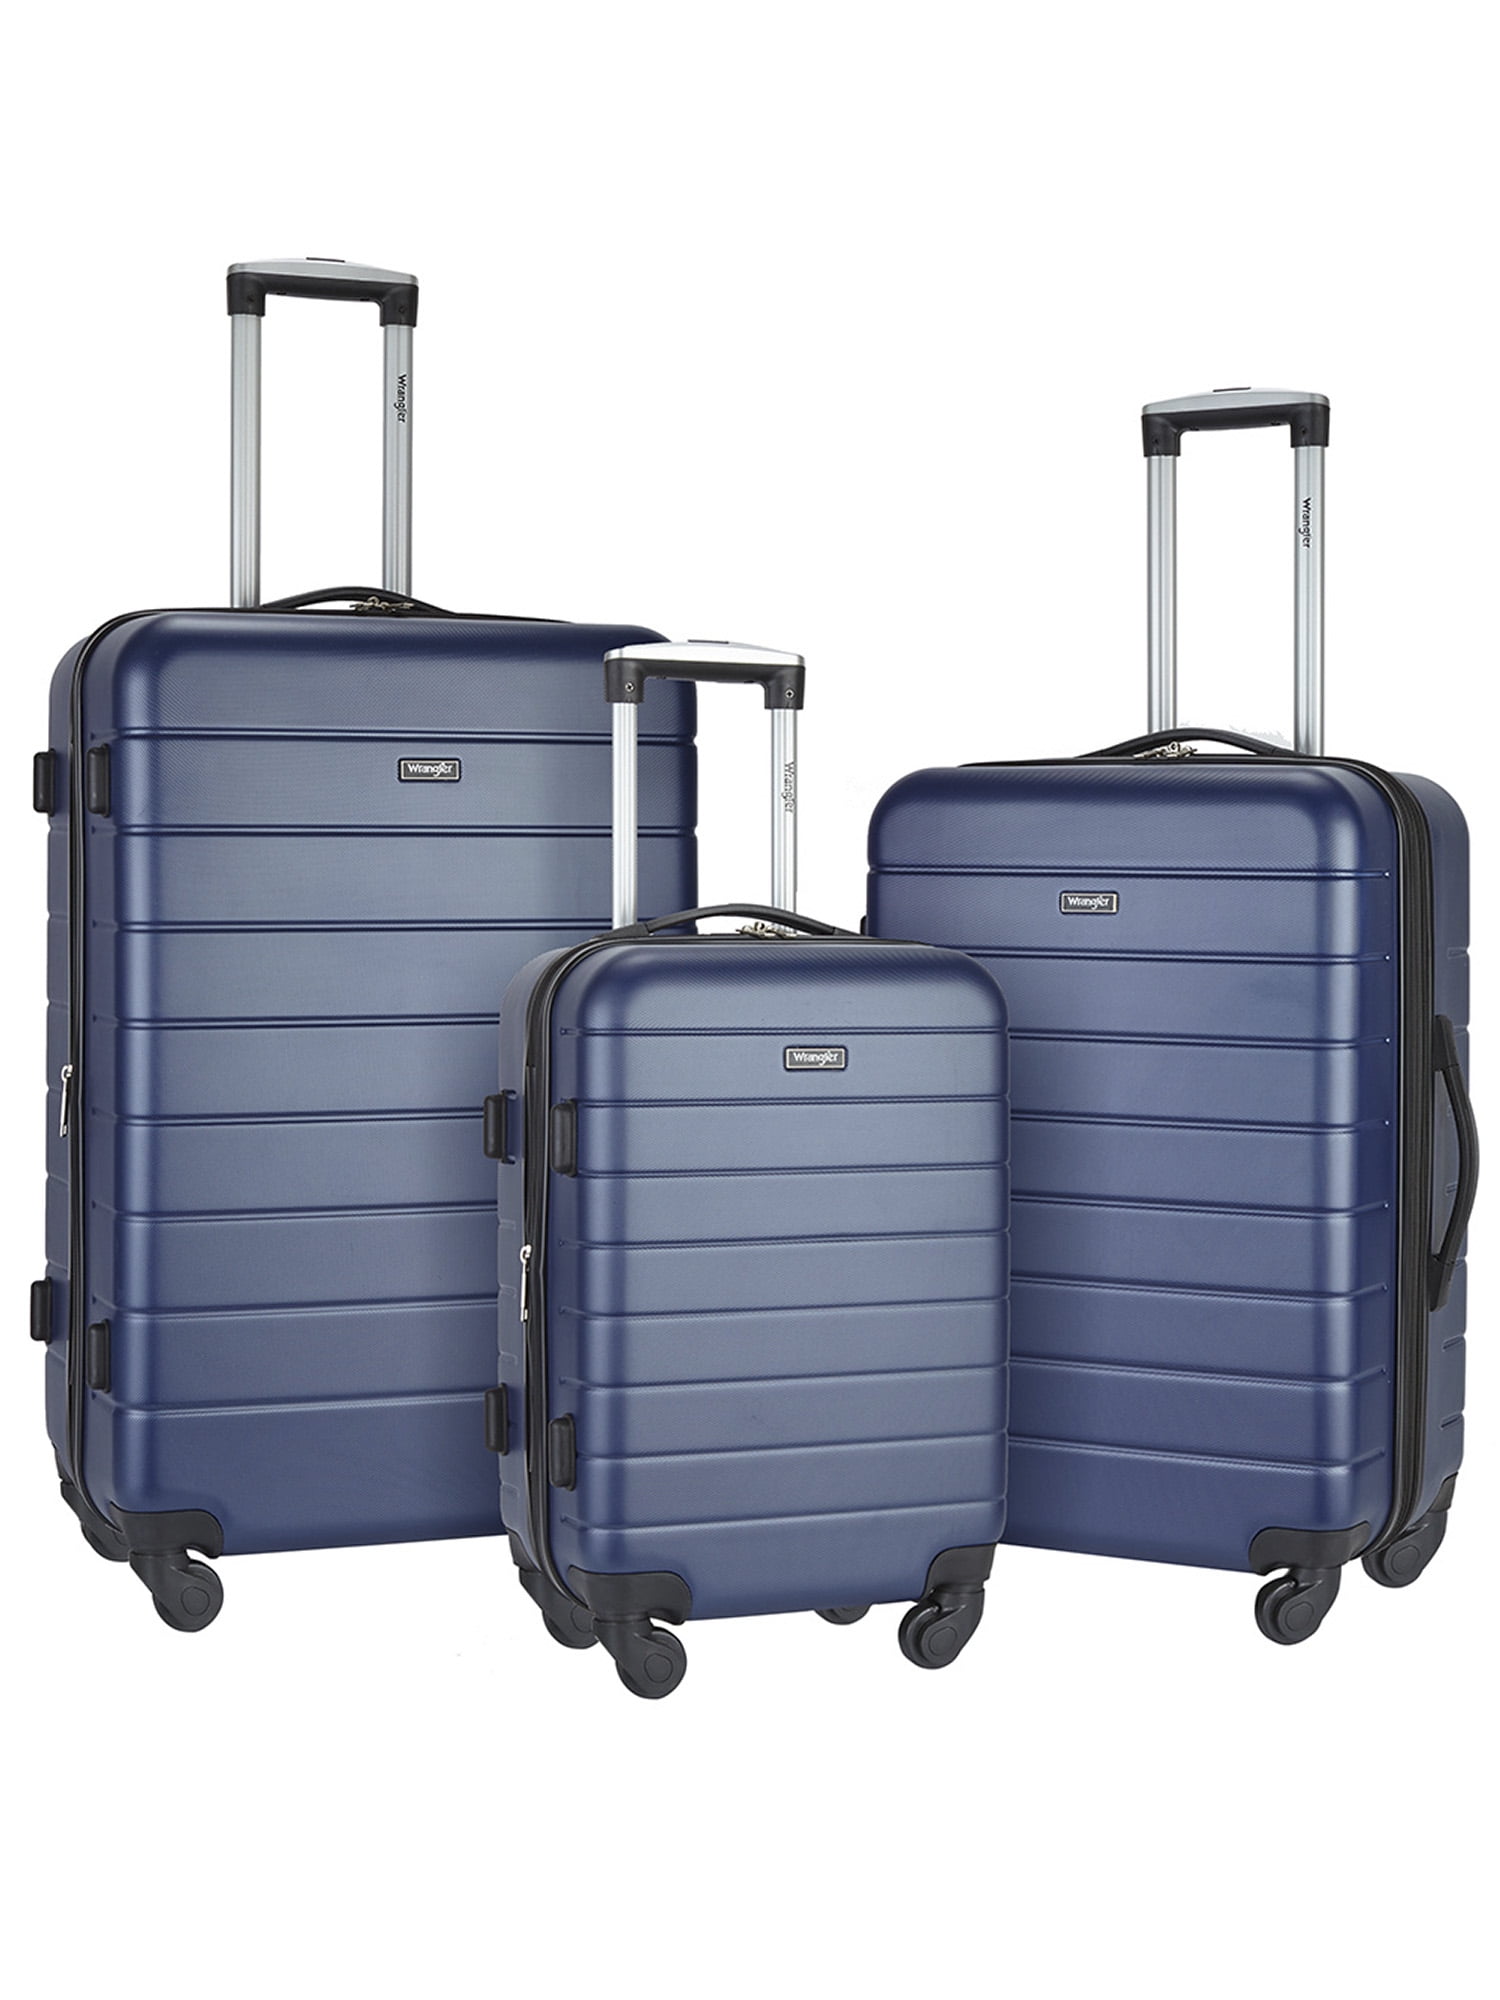 Wrangler 3 Piece Luggage Set with Cup Holder and USB Port, Navy Blue -  